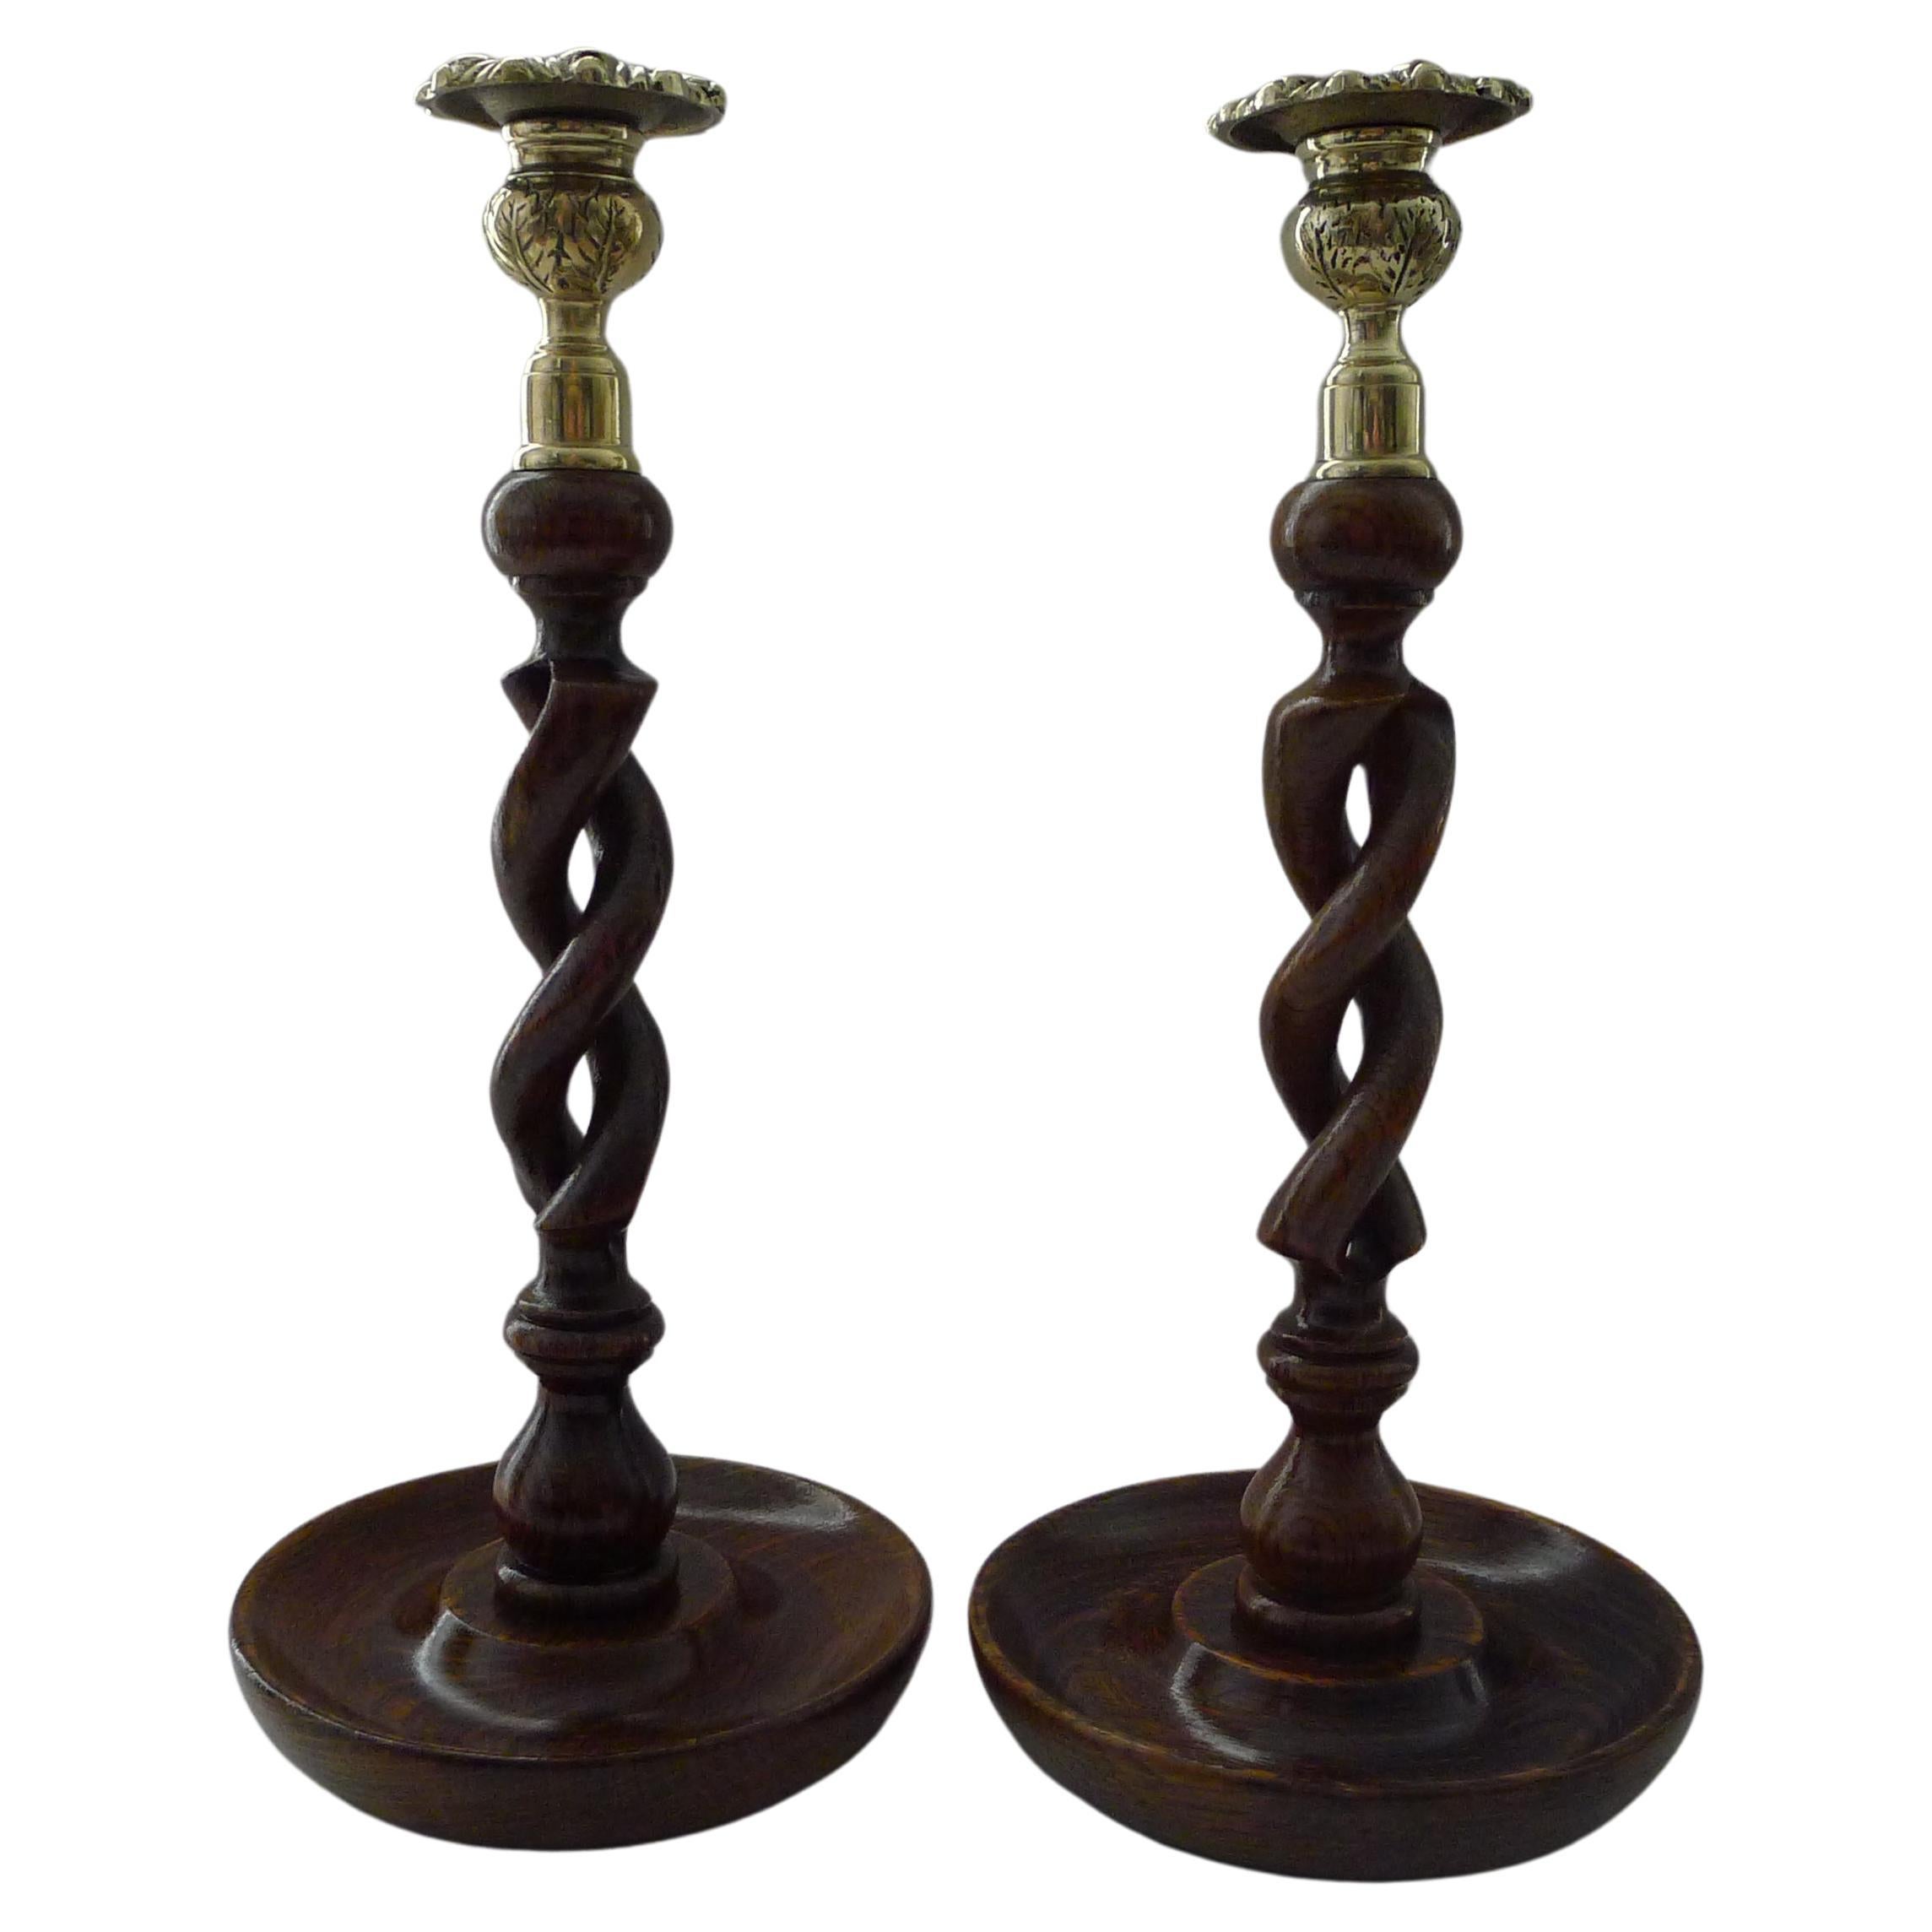 A wonderful pair of wooden candlesticks, always a winning combination, polished Oak and brass.

Not to be confused with a simple pair of twists, these are the highly sought-after 